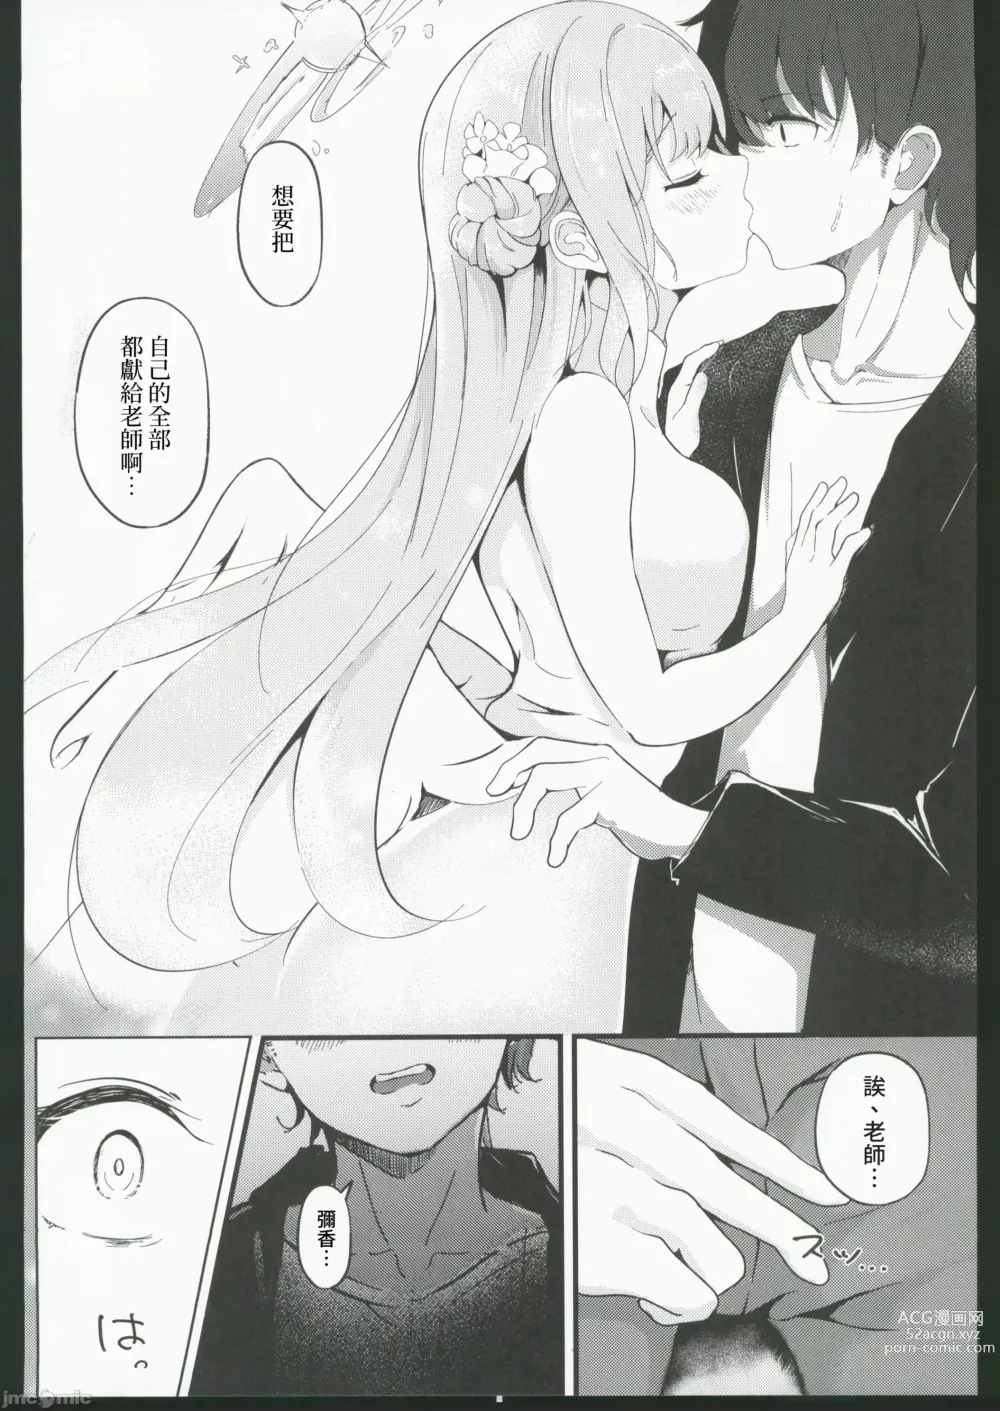 Page 9 of doujinshi Blanc Aile to Otogibanashi - The treaty lost, but hope remains.